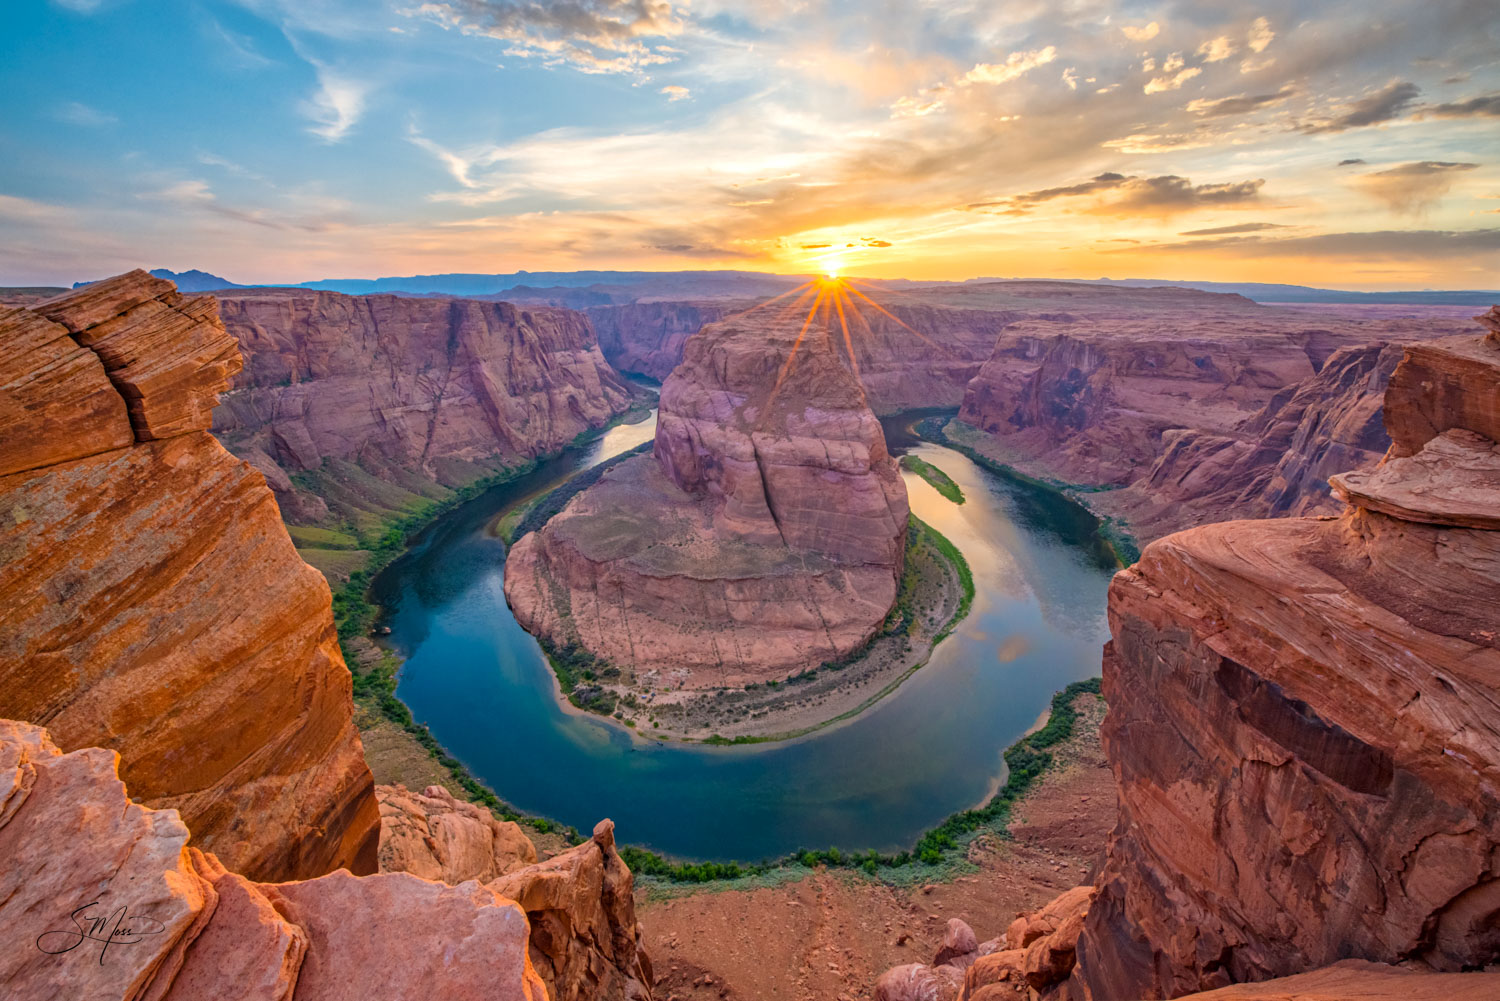 Horseshoe Bend with the Colorado River at sunset in wild and scenic Arizona